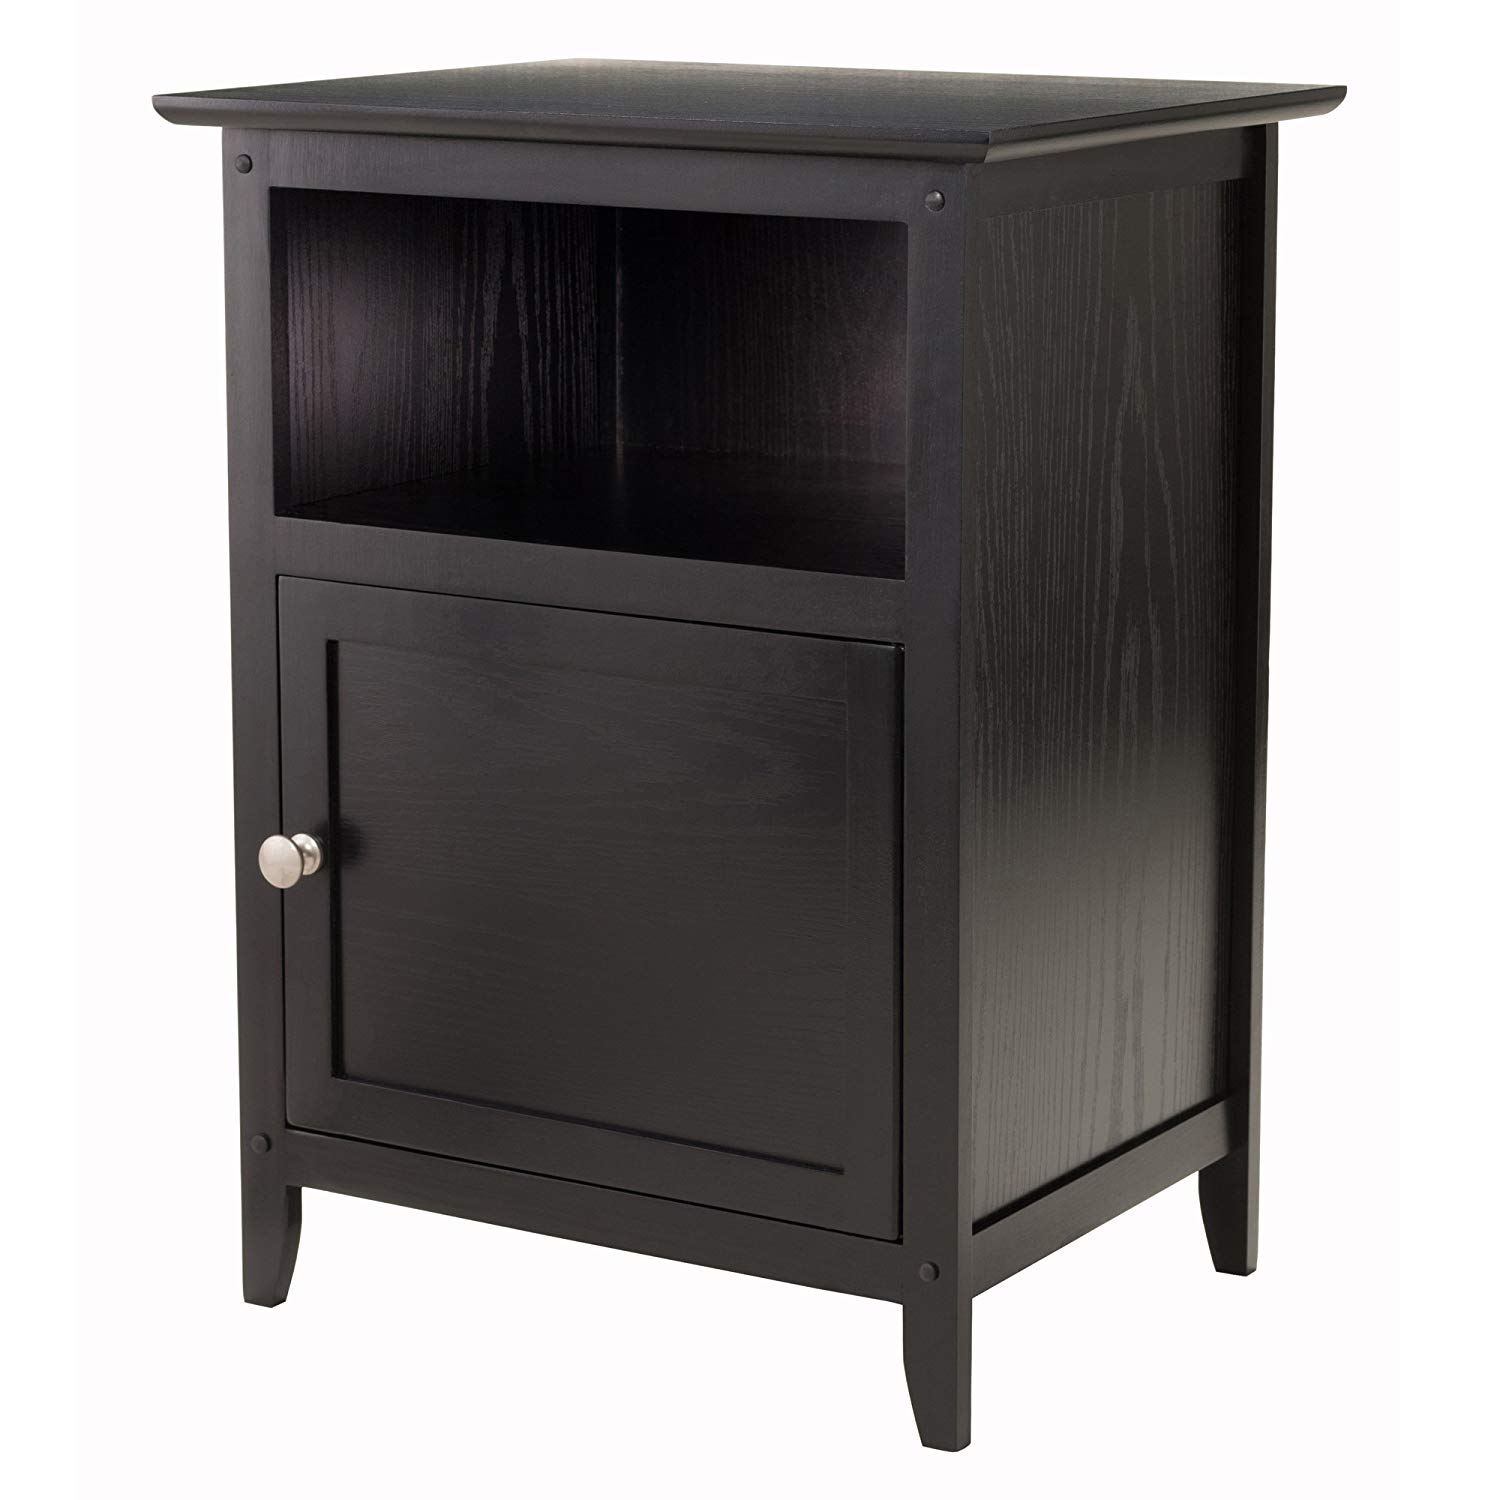 nightstands sage green accent tables winsome wood henry table black see color options small circle gas dryers grey bedroom chair patio furniture clearance bunnings timber outdoor